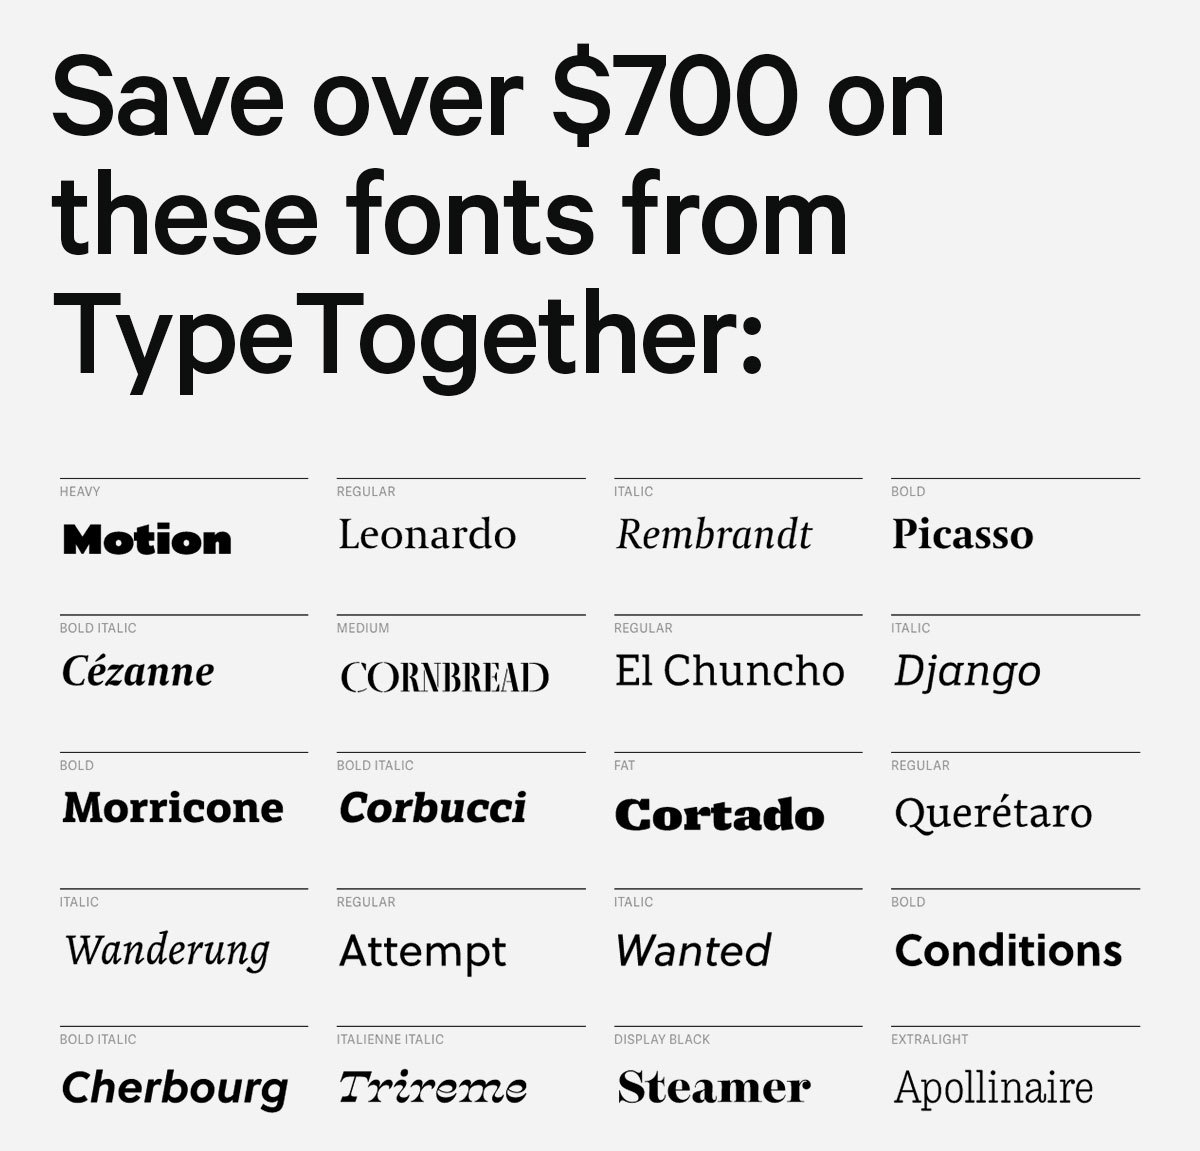 Save over $700 on these fonts from TypeTogether: